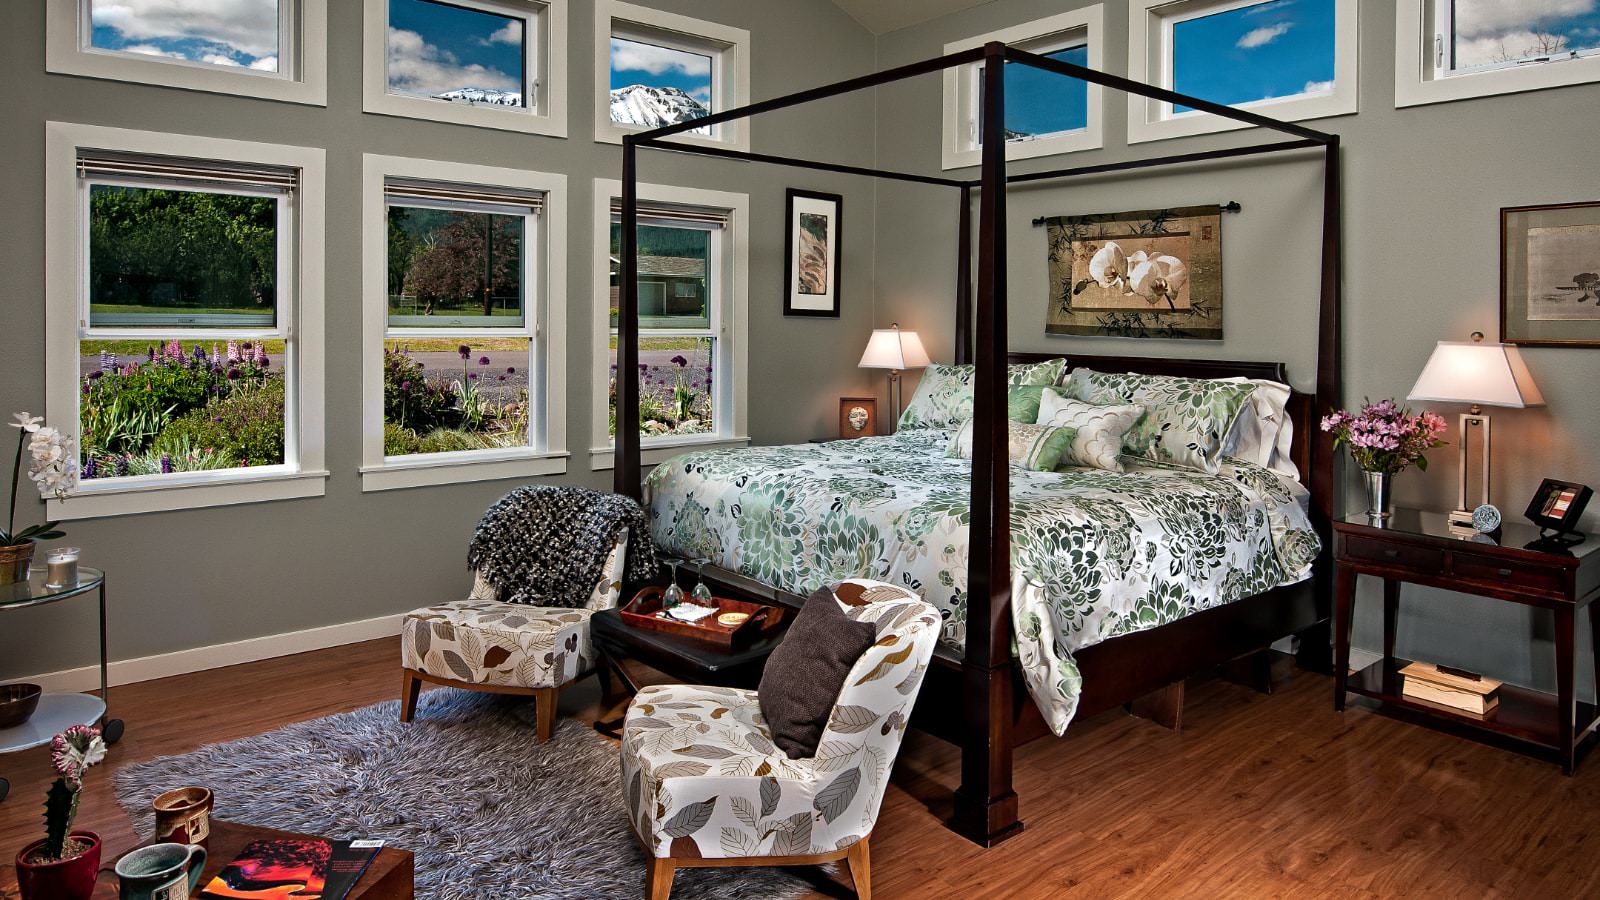 Bedroom with light gray walls, hardwood flooring, vaulted ceiling, four poster dark wooden bed, multicolored bedding, sitting area, and many windows with views of the mountain